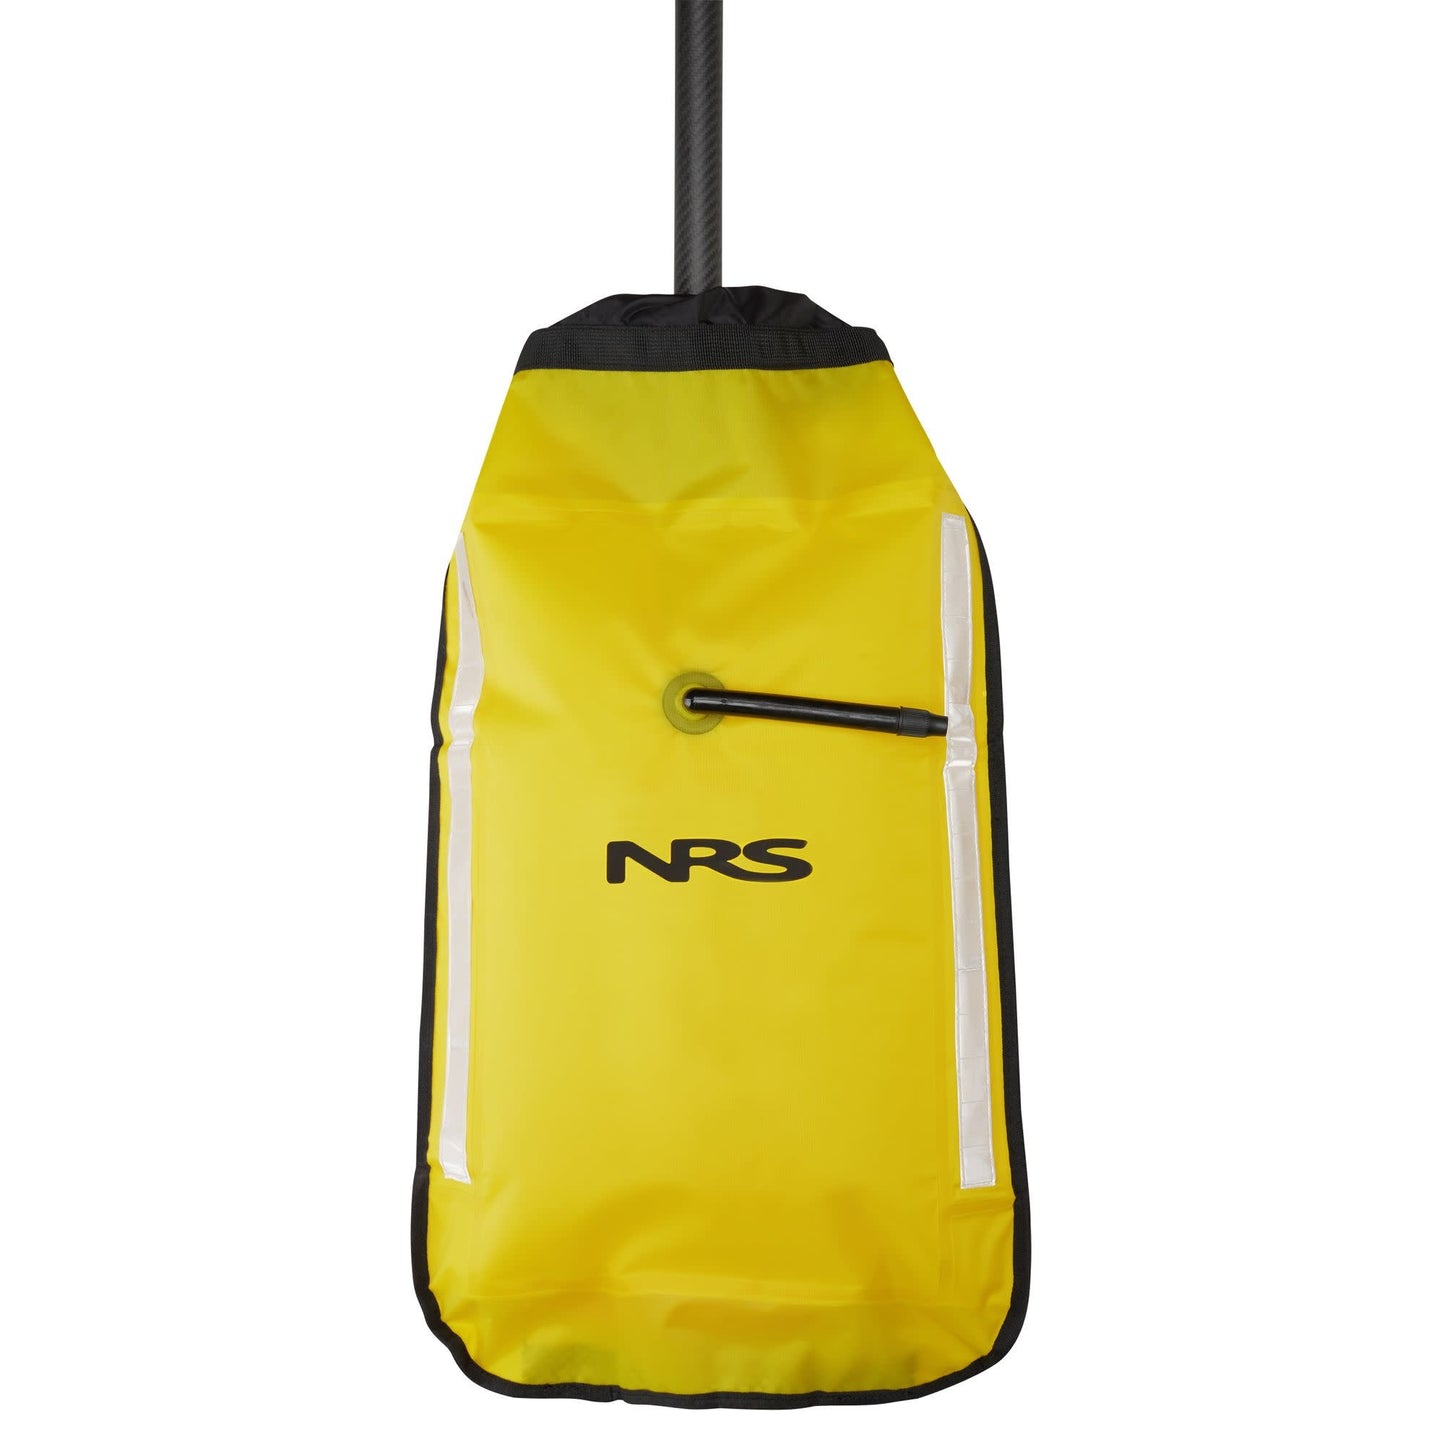 NRS Paddle Float Inflatable